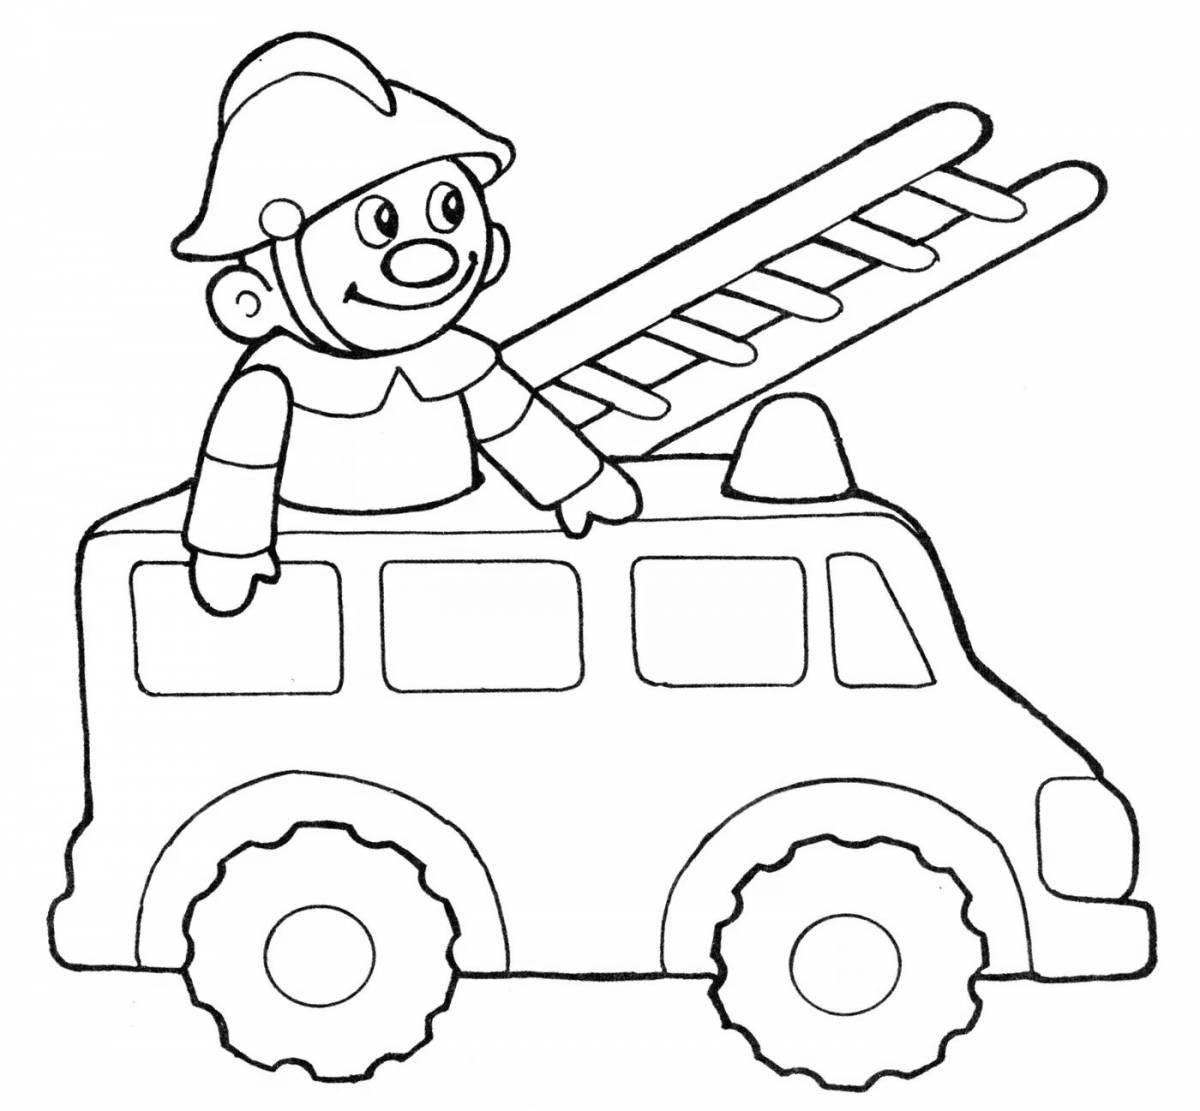 Outstanding fire truck coloring page